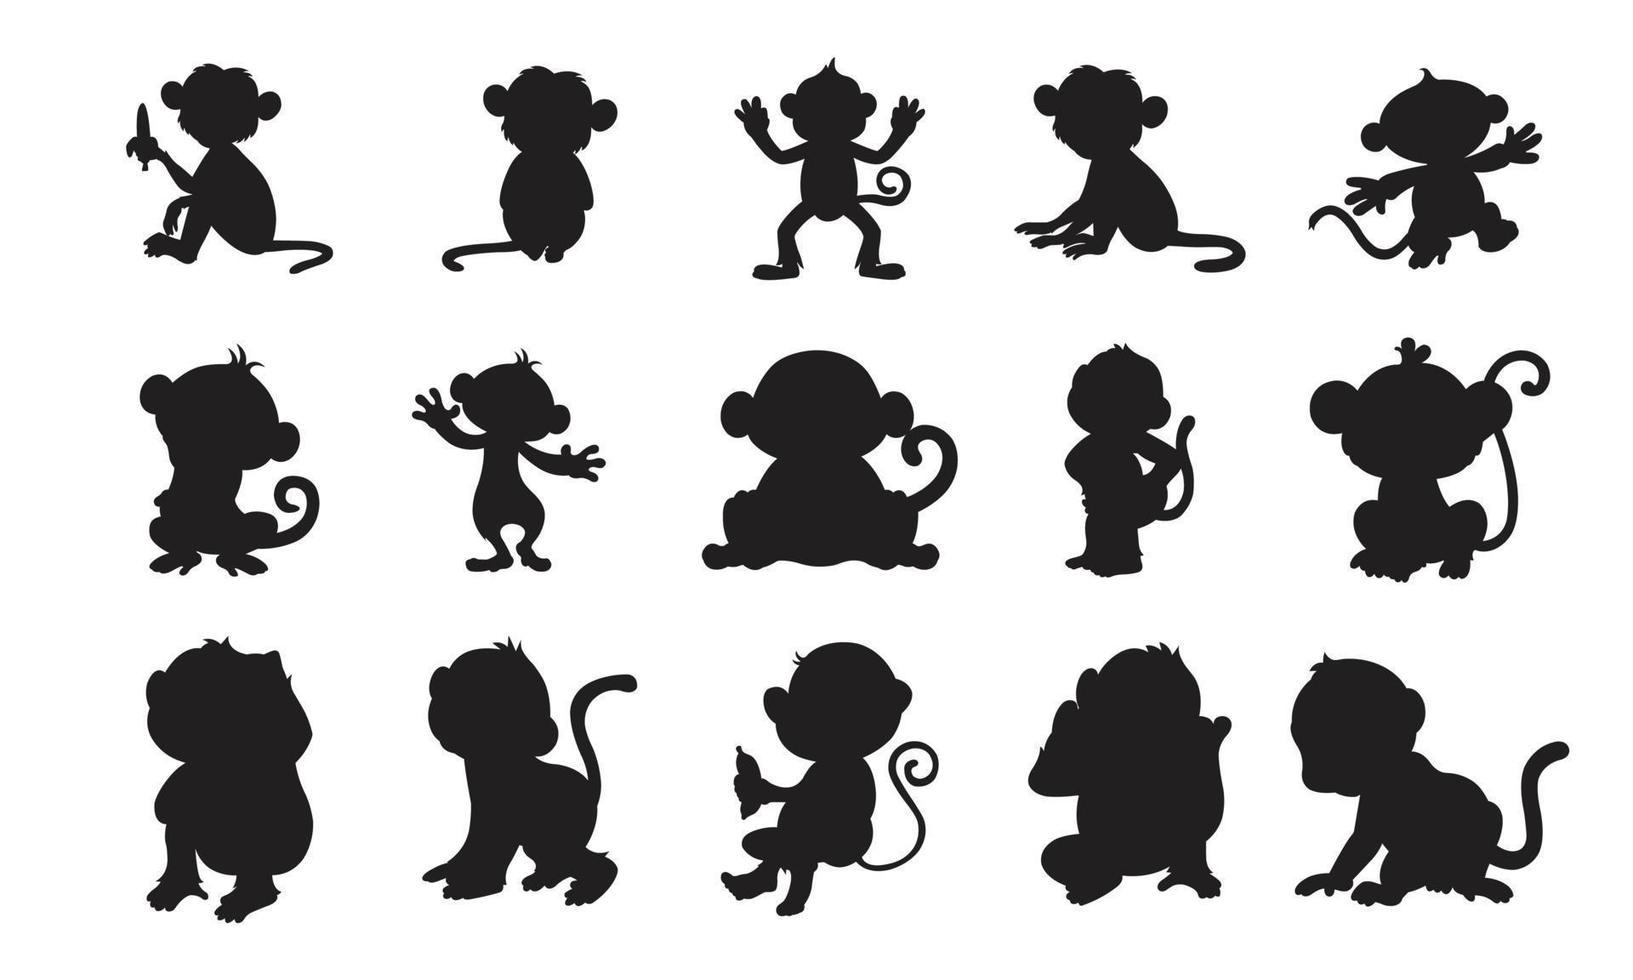 Monkey Silhouette Set Illustration Apes Vector Collection Isolated On White Background Black Animal Silhouette Set Coloring Book for Kids